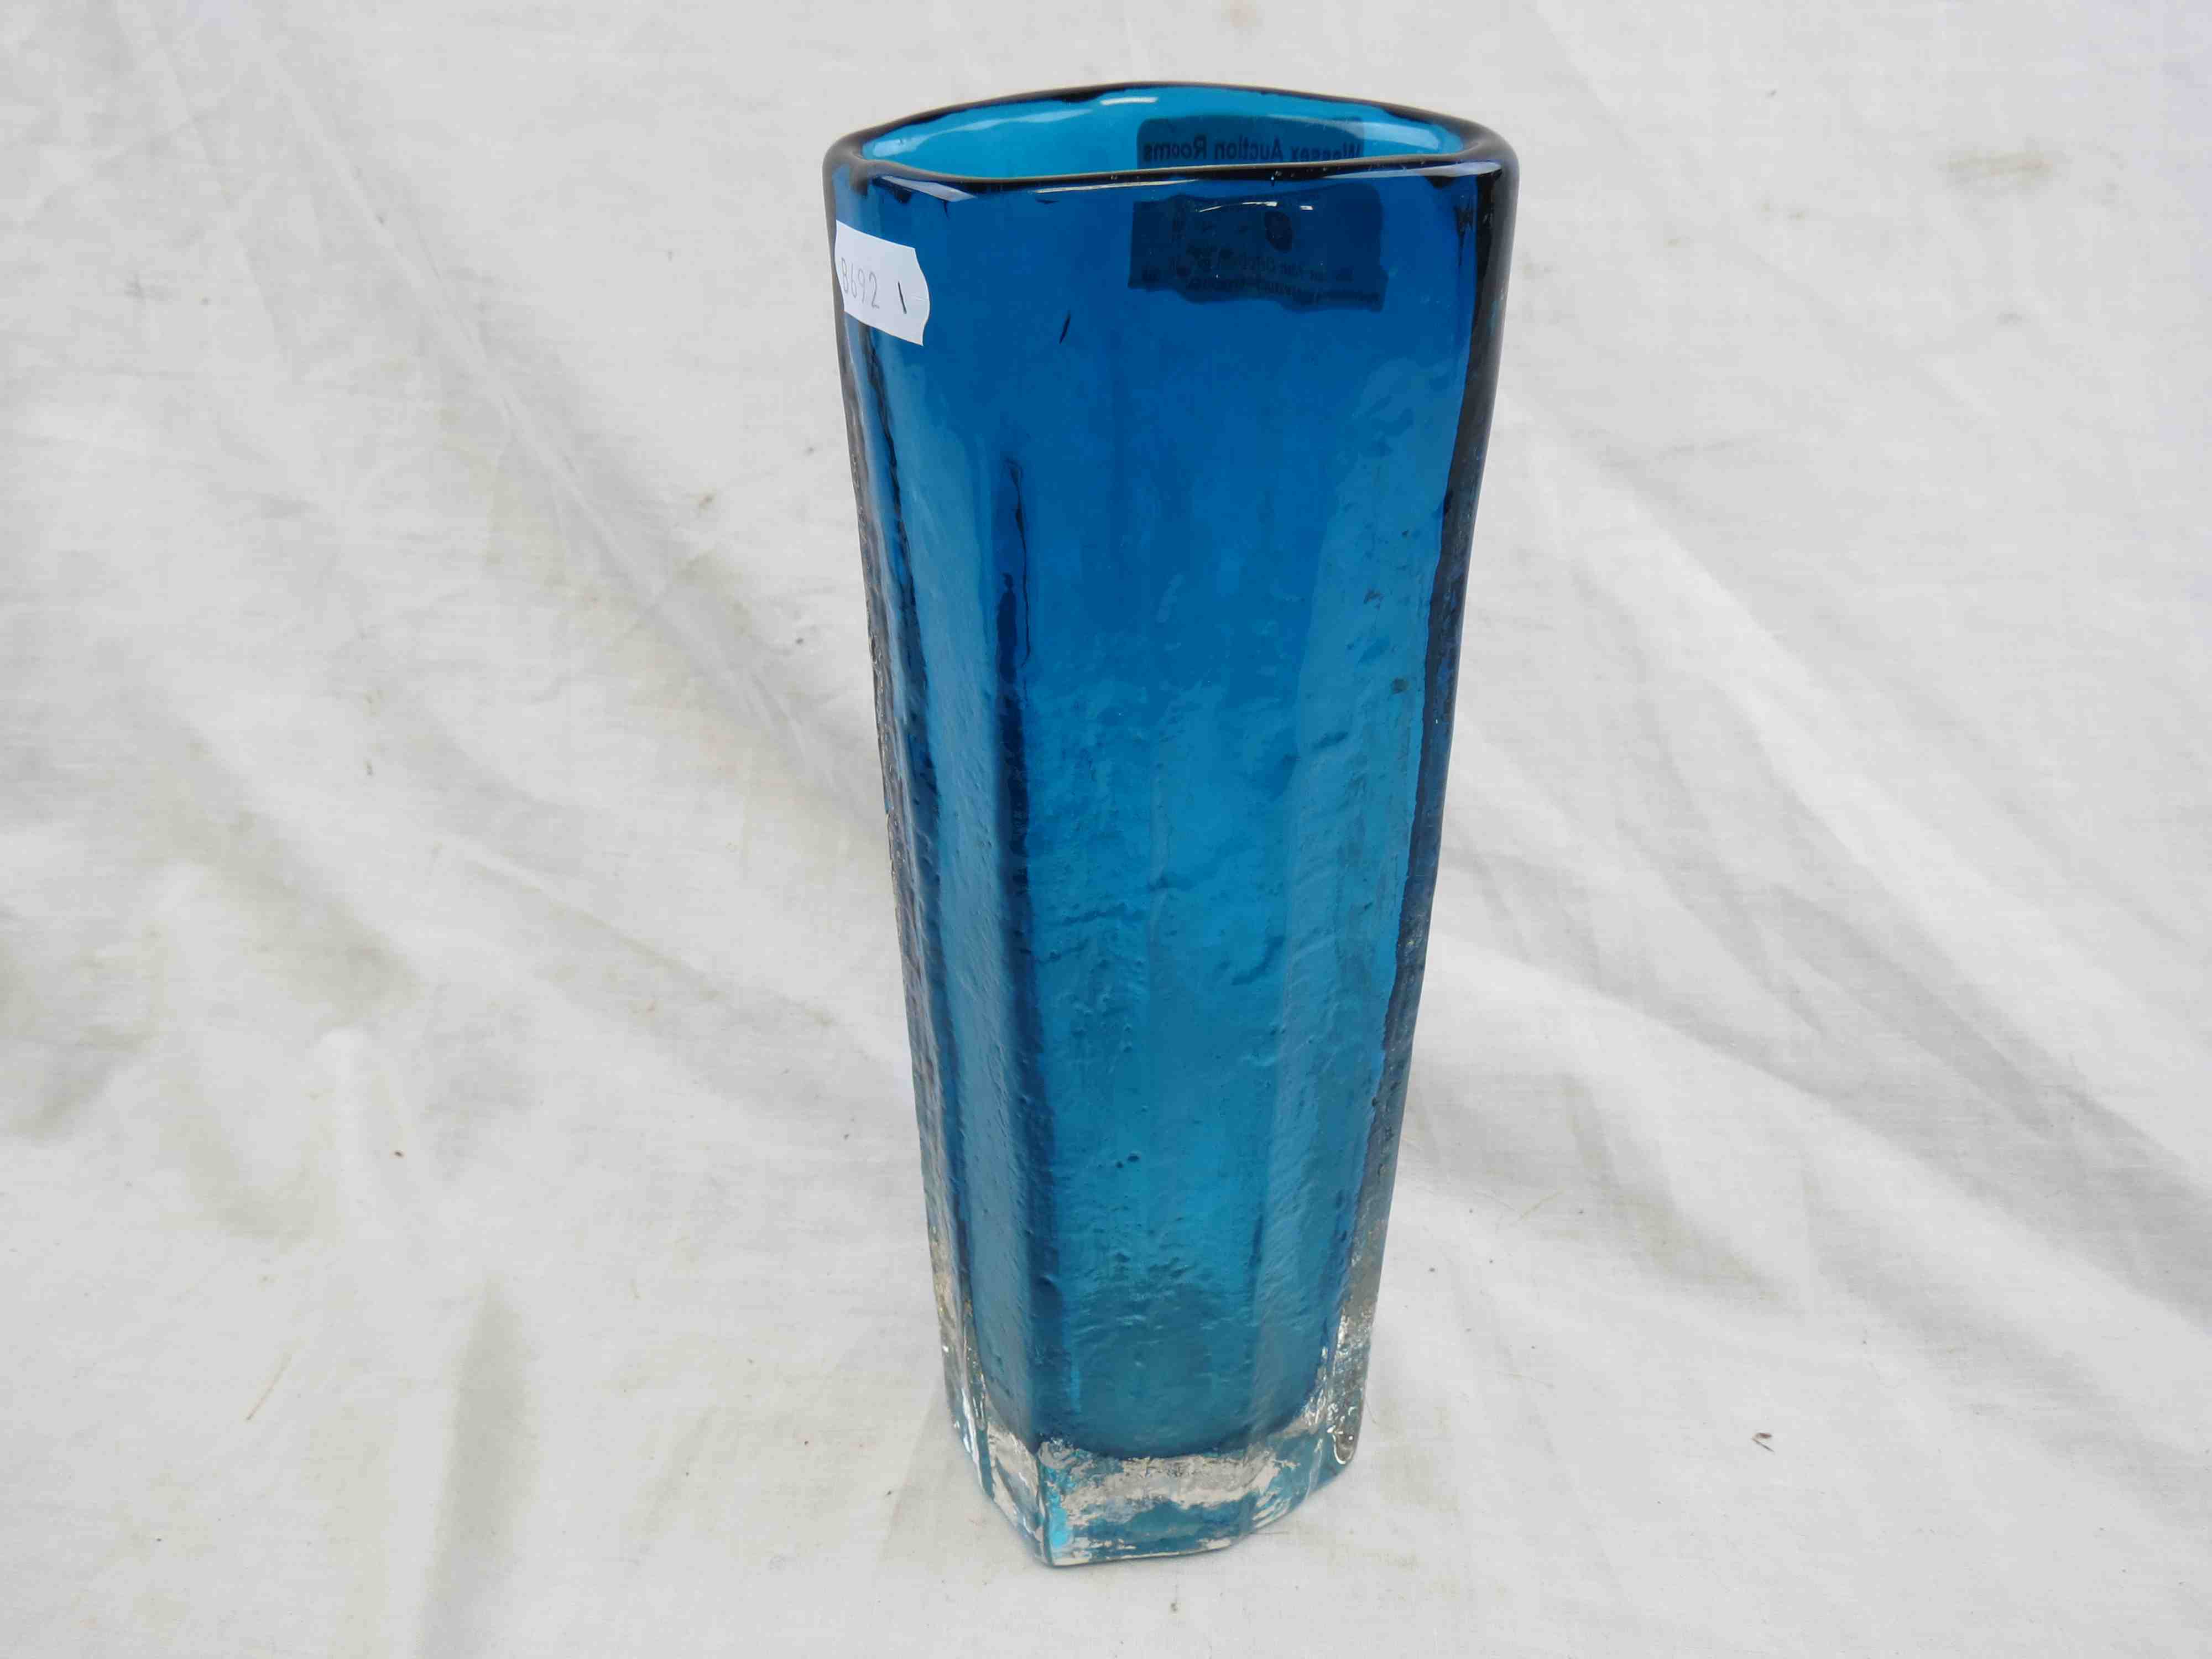 Geoffrey Baxter for Whitefriars kingfisher glass cucumber vase, pattern number 9679, textured - Image 2 of 7